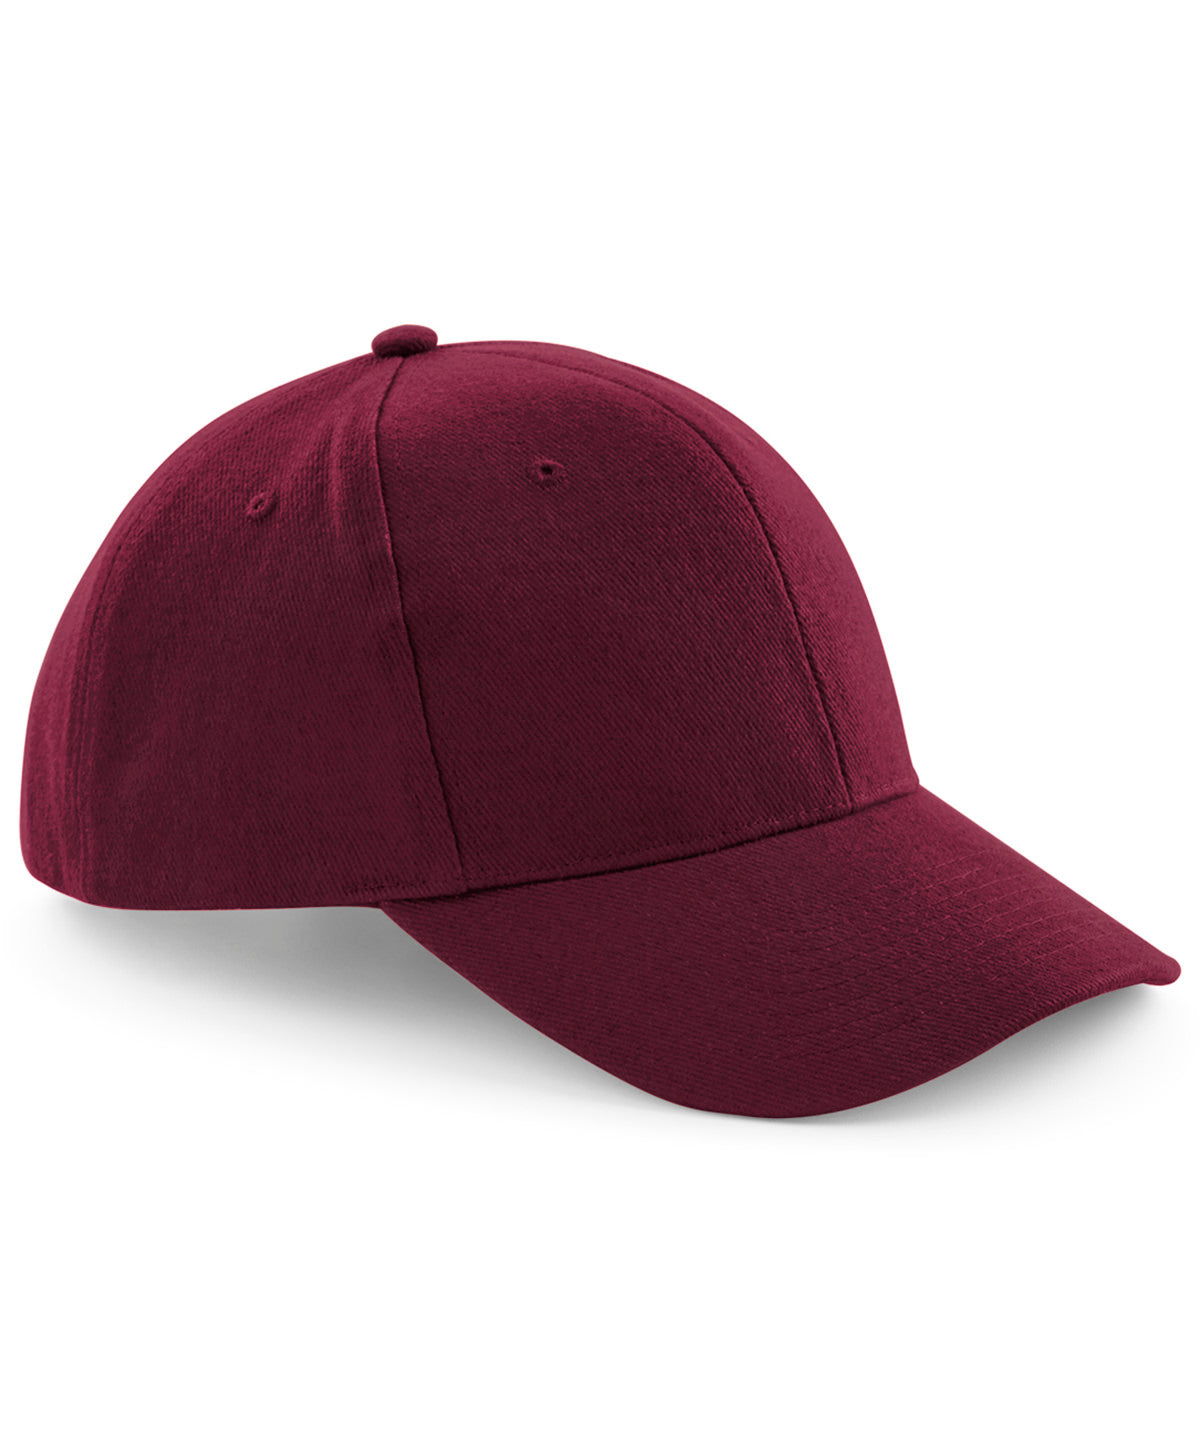 Personalised Caps - Burgundy Beechfield Pro-style heavy brushed cotton cap